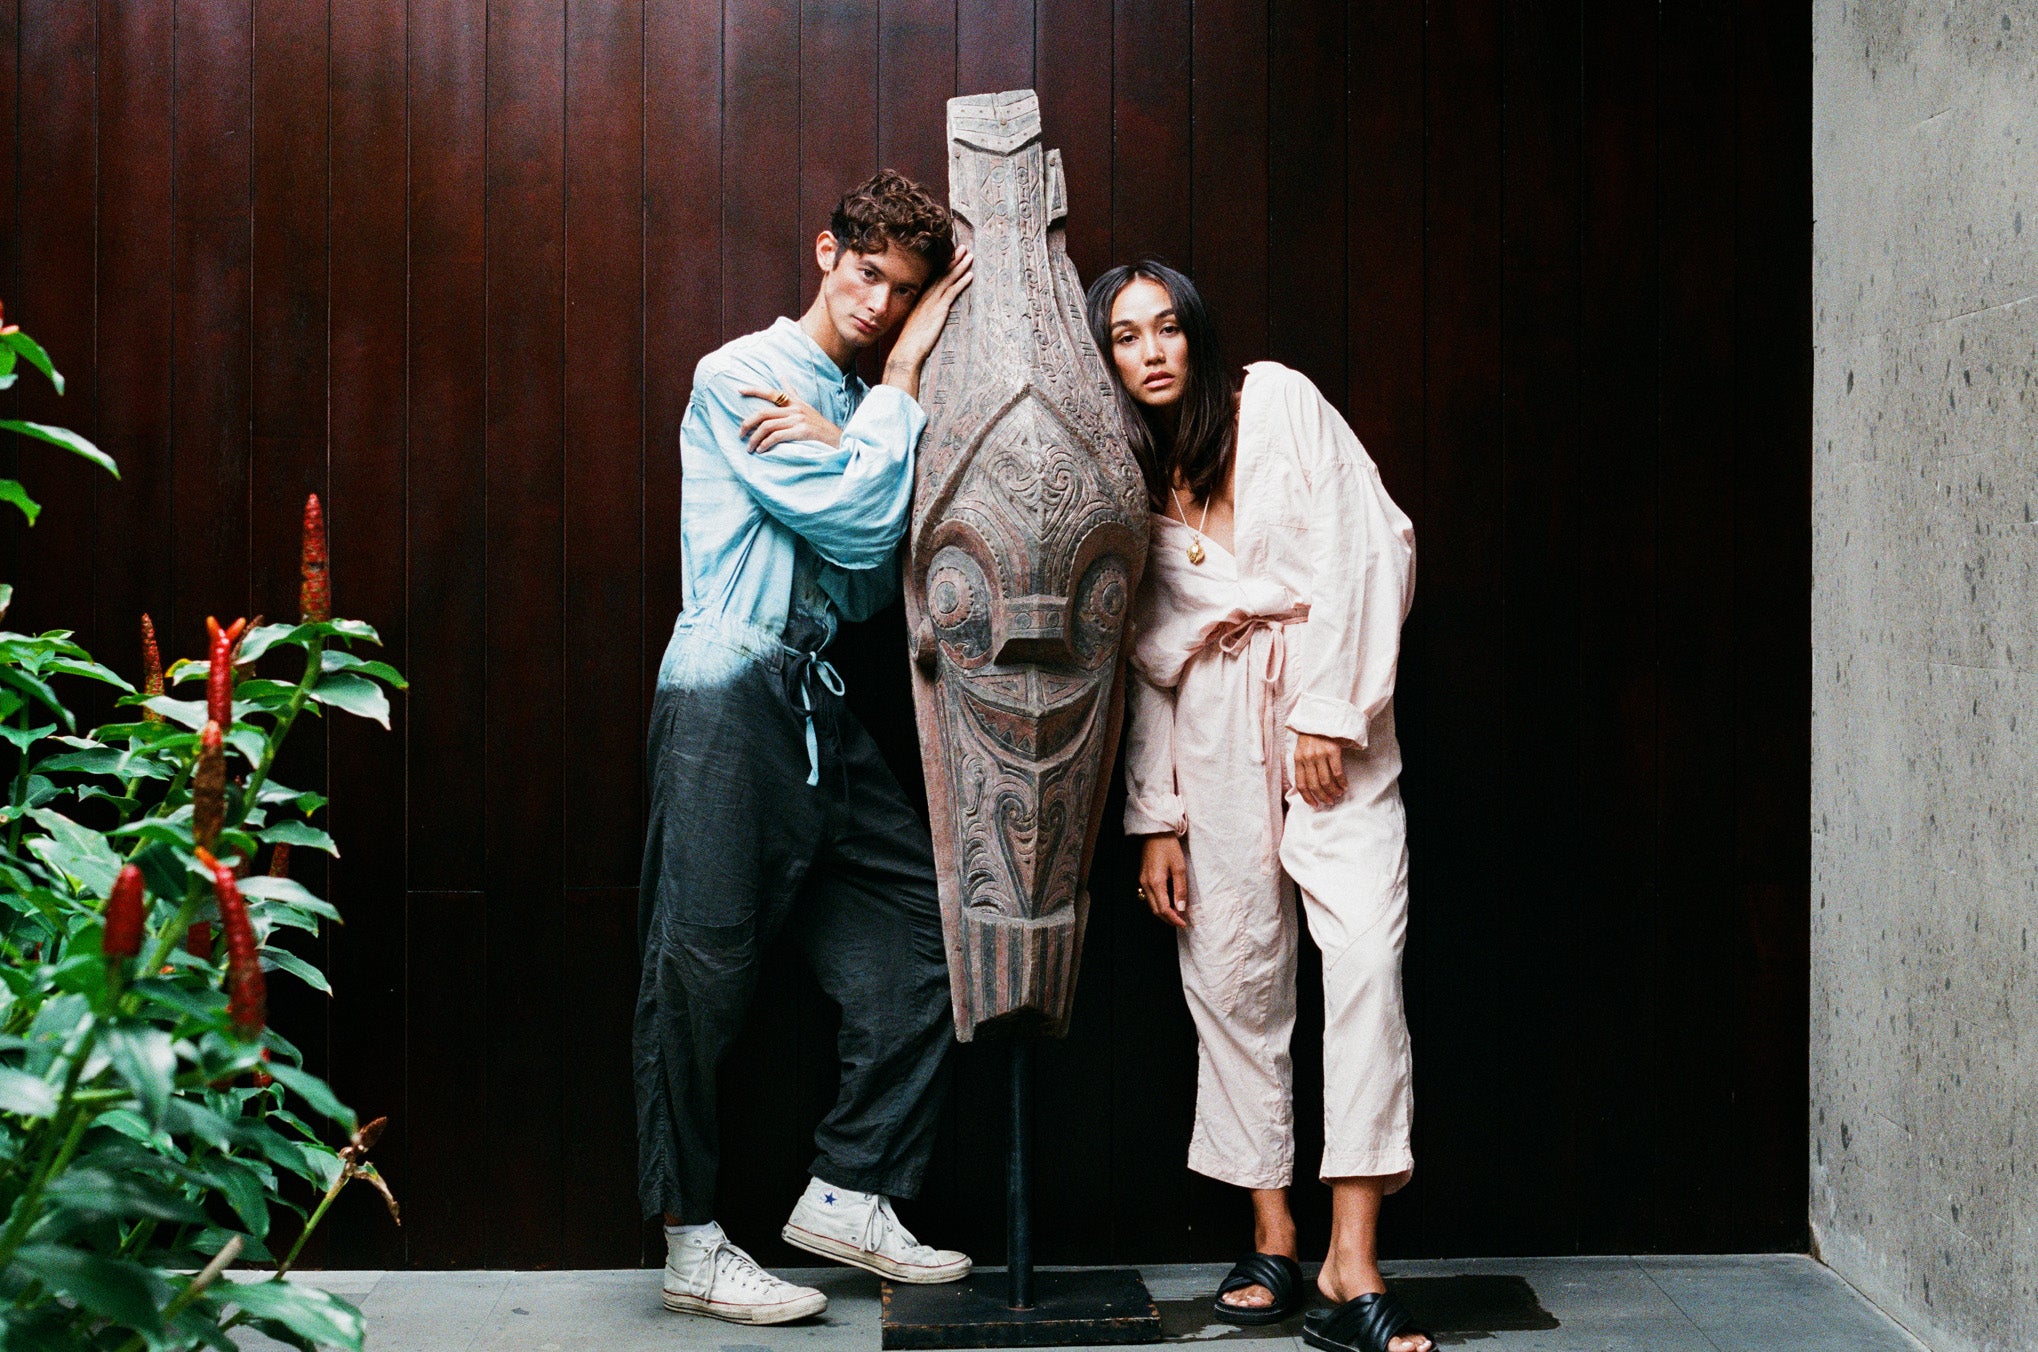 Lookbook Shot Johnny and Amira in Adventure Sail Jumpsuits